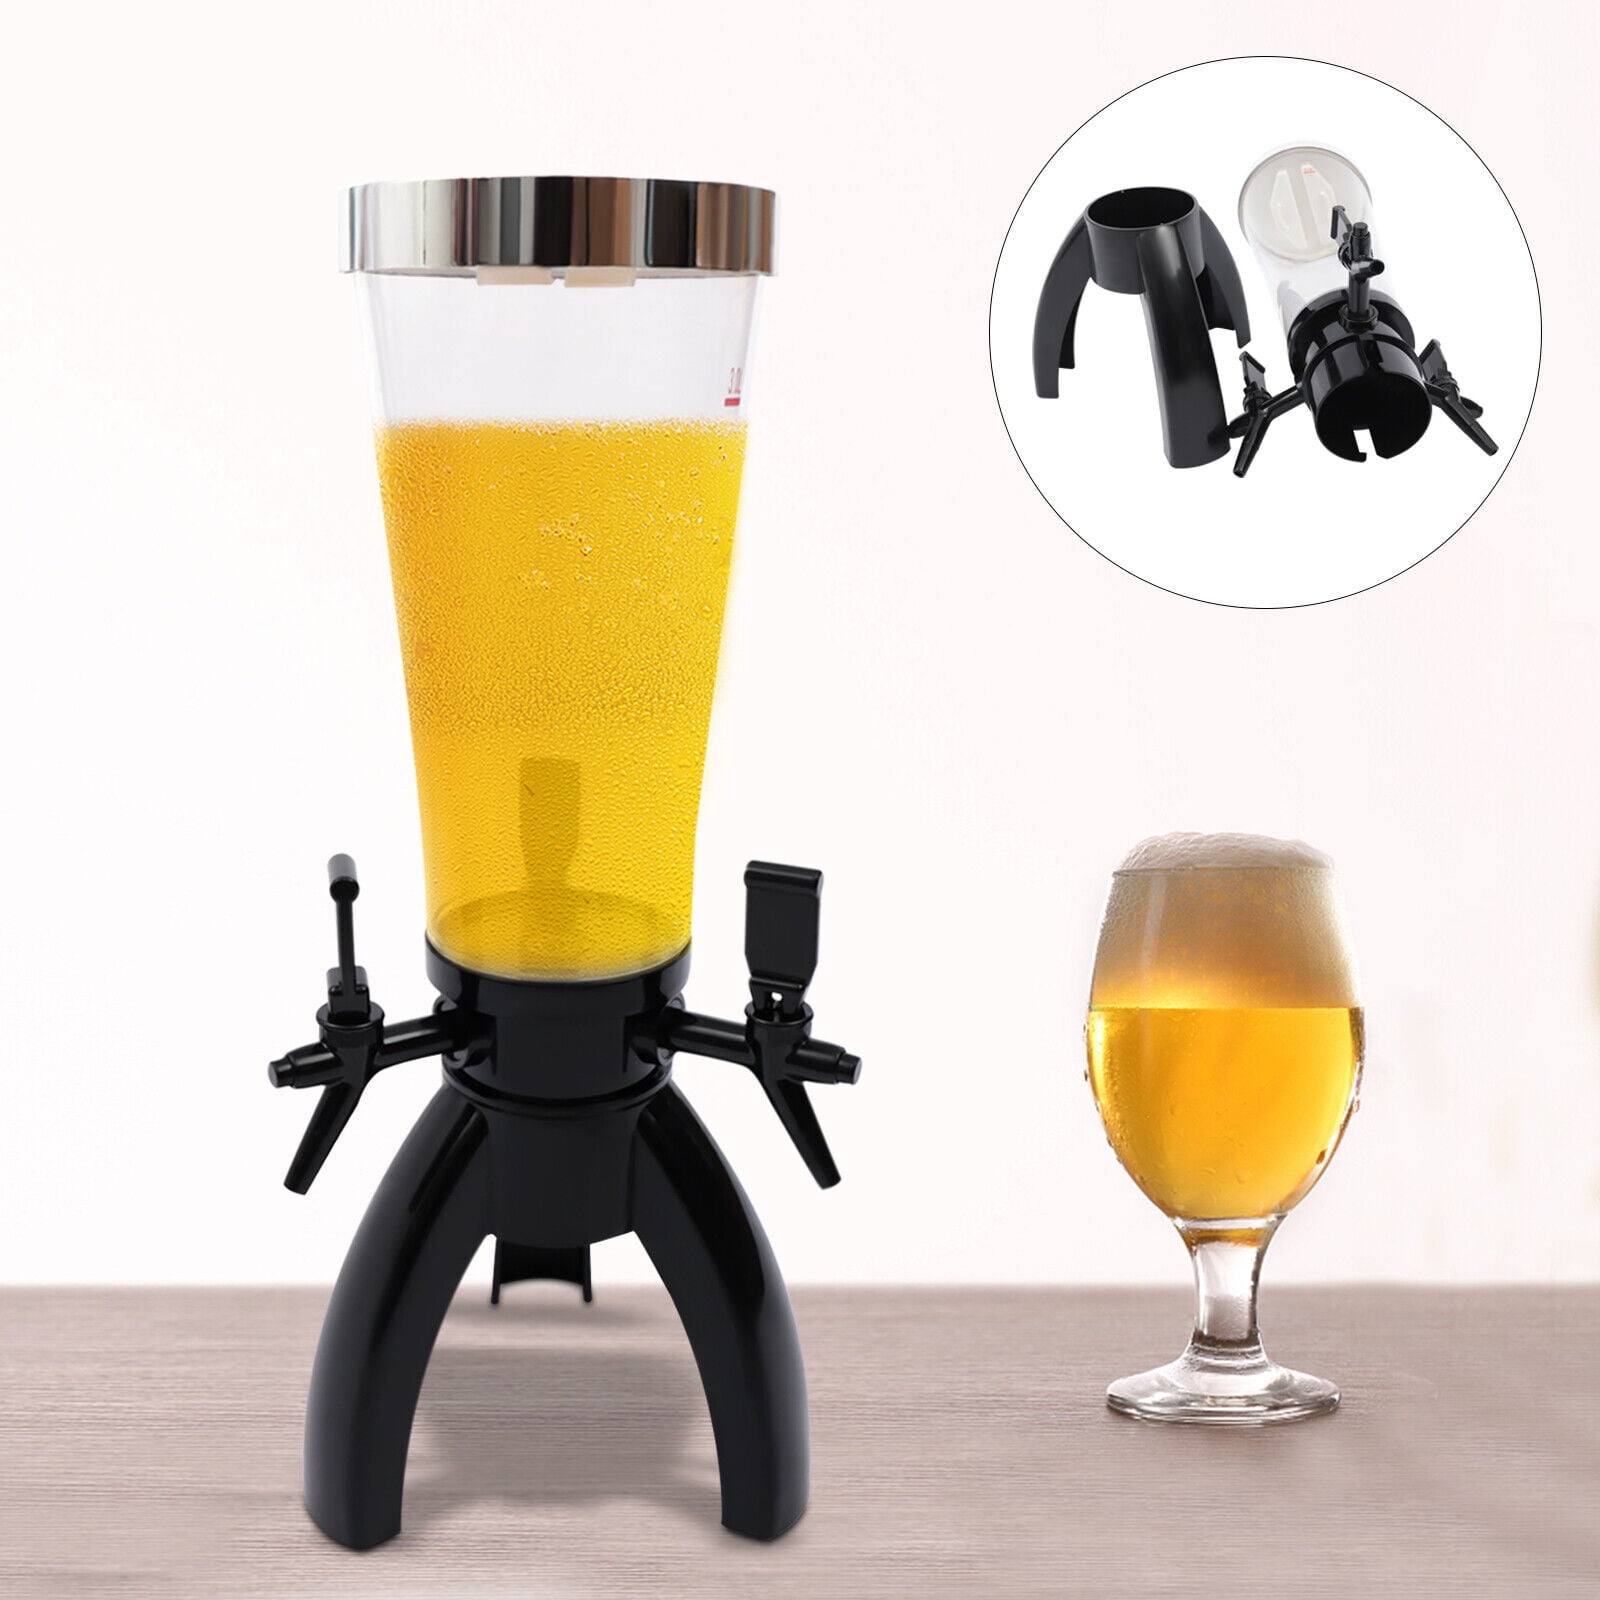 Drink Tower Dispenser Beer Tower 3L Mimosa Tower Dispenser Margarita Tower Drink Dispensers for Parties Beer Tower Dispenser Beer Tower Dispenser